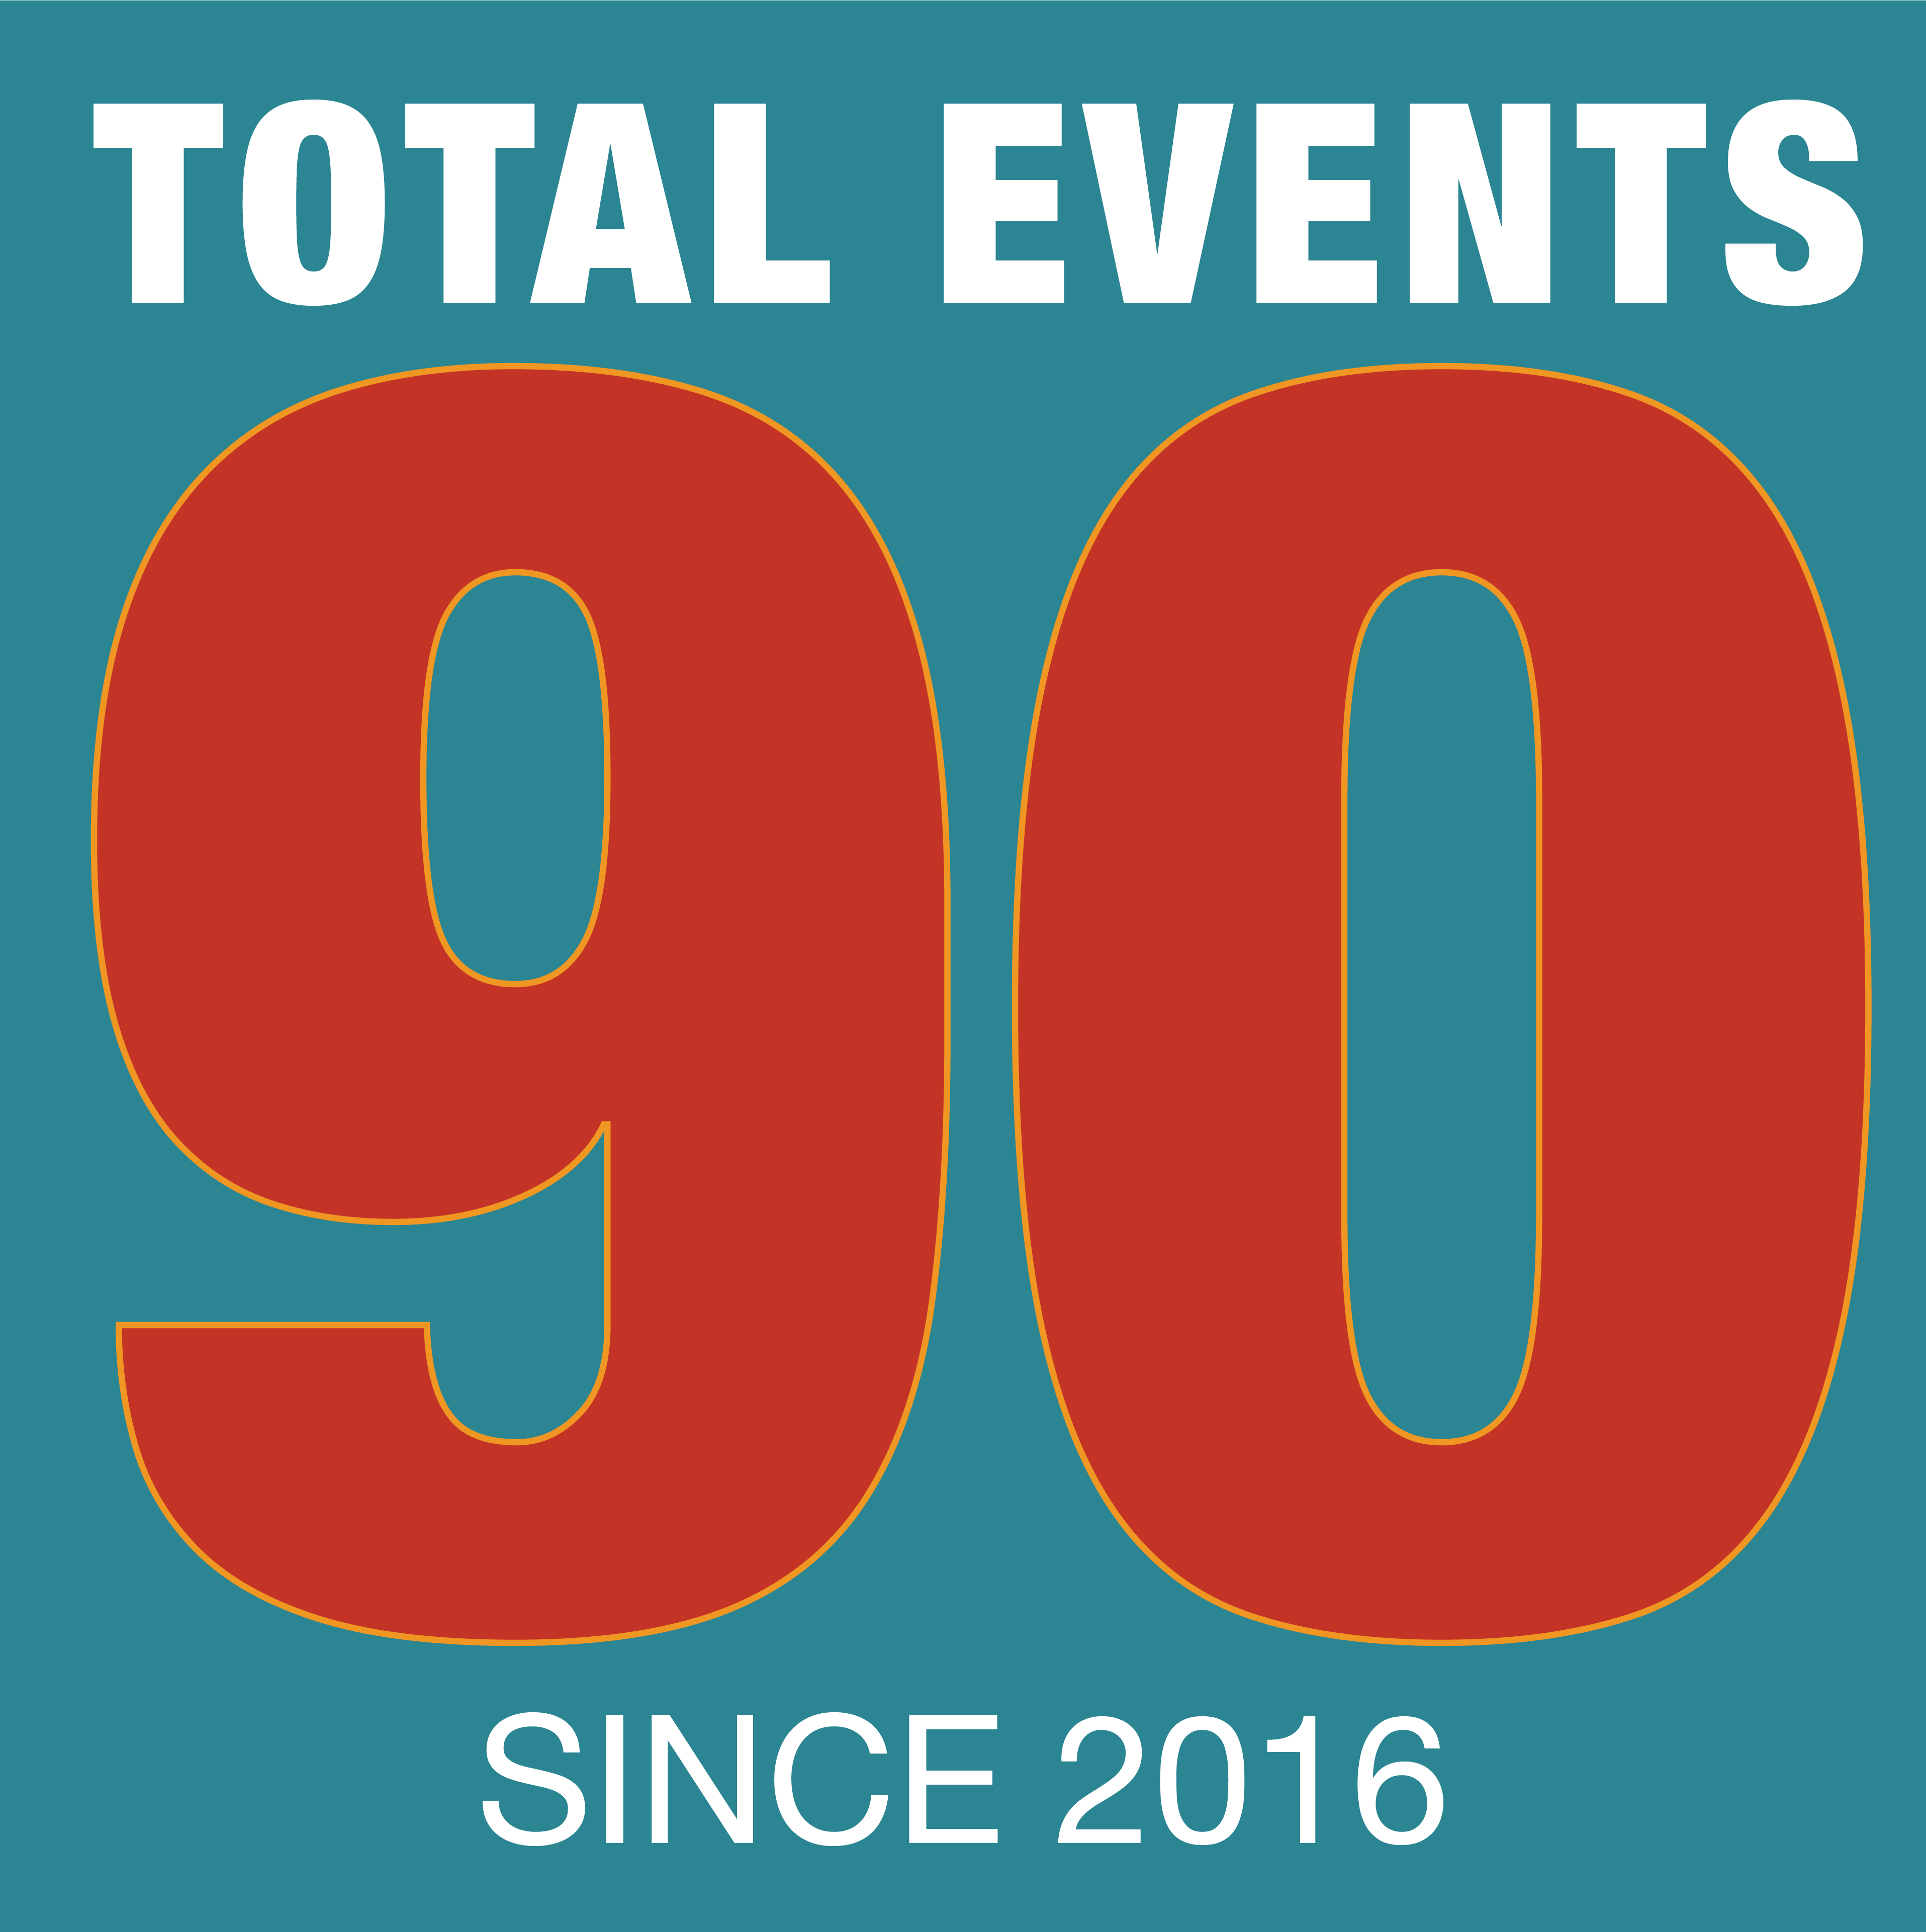 reads: total of 90 events since 2016